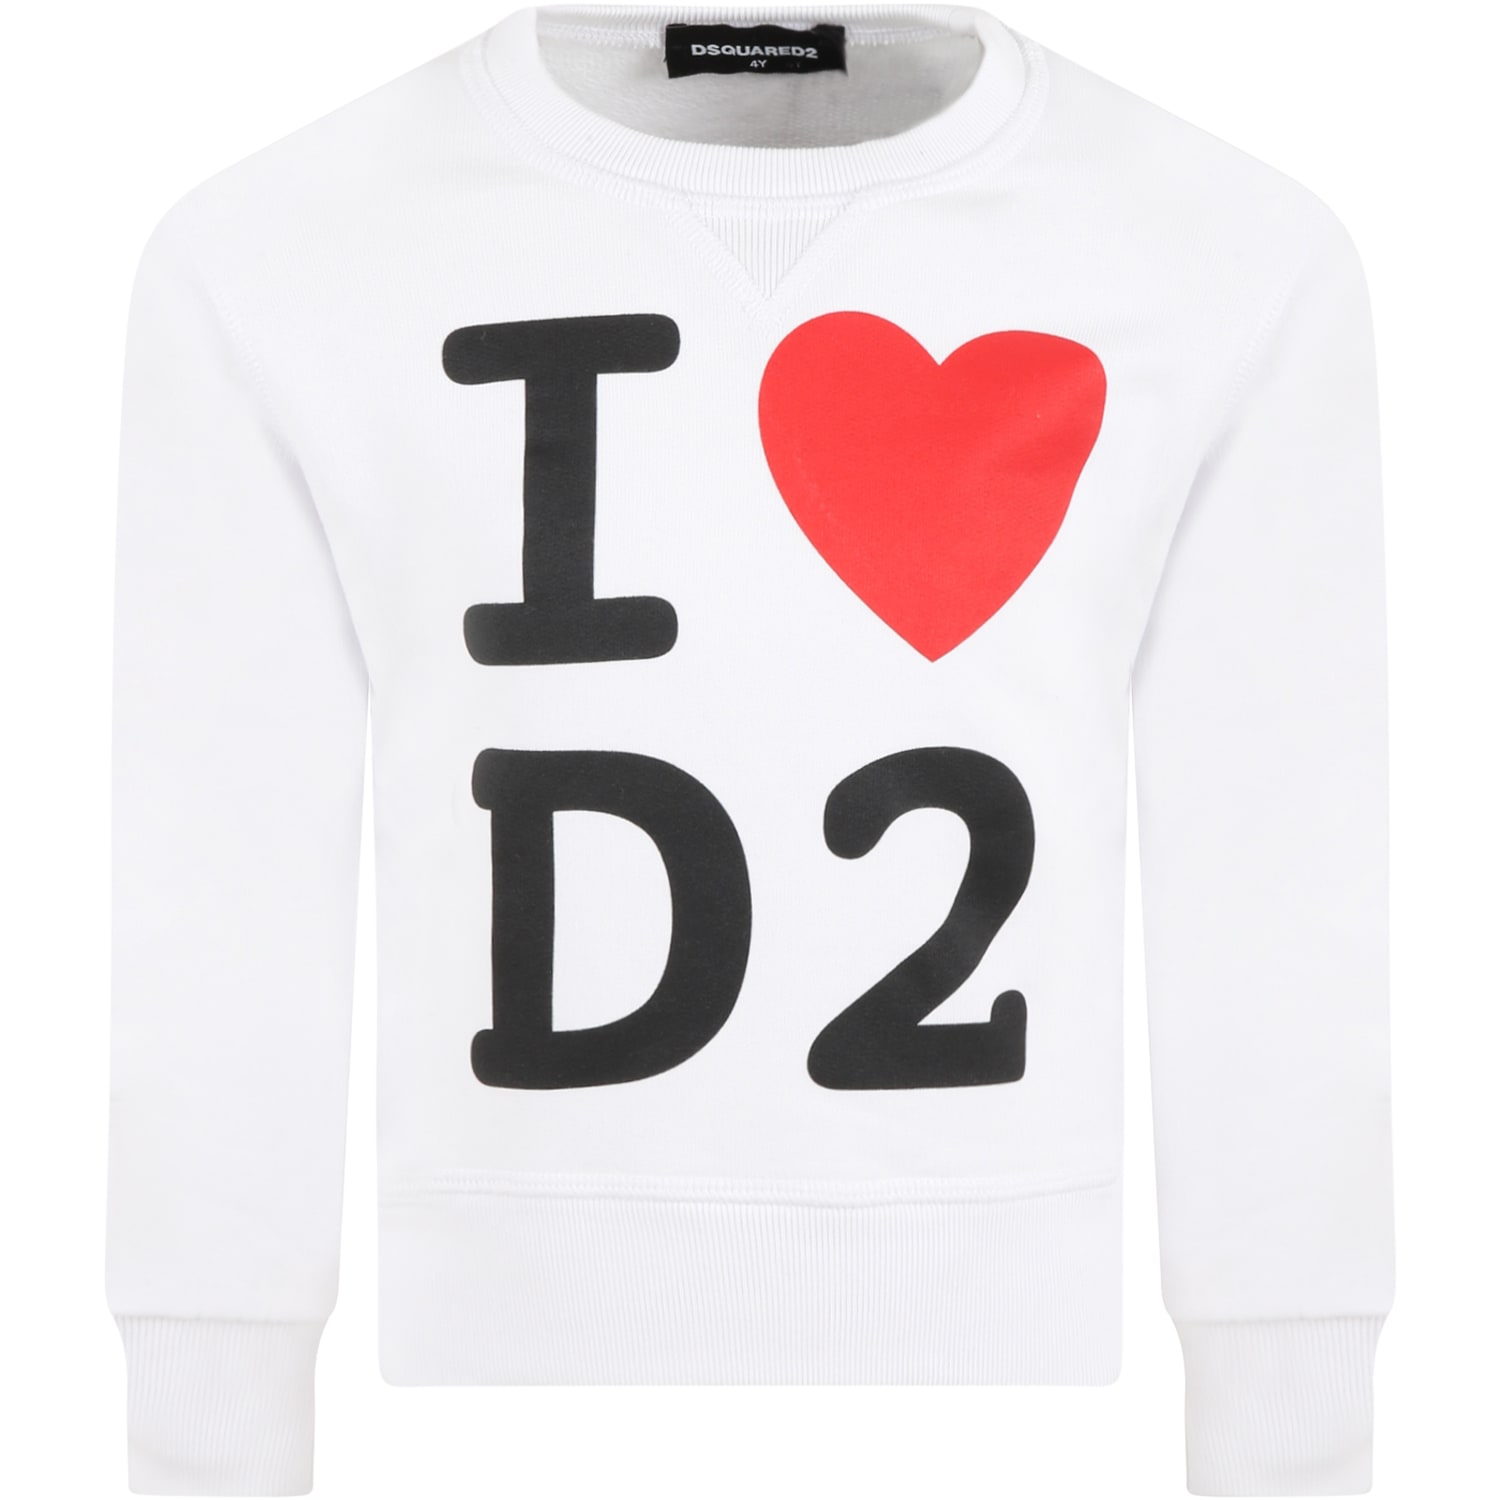 Dsquared2 White Sweatshirt For Kids With Heart